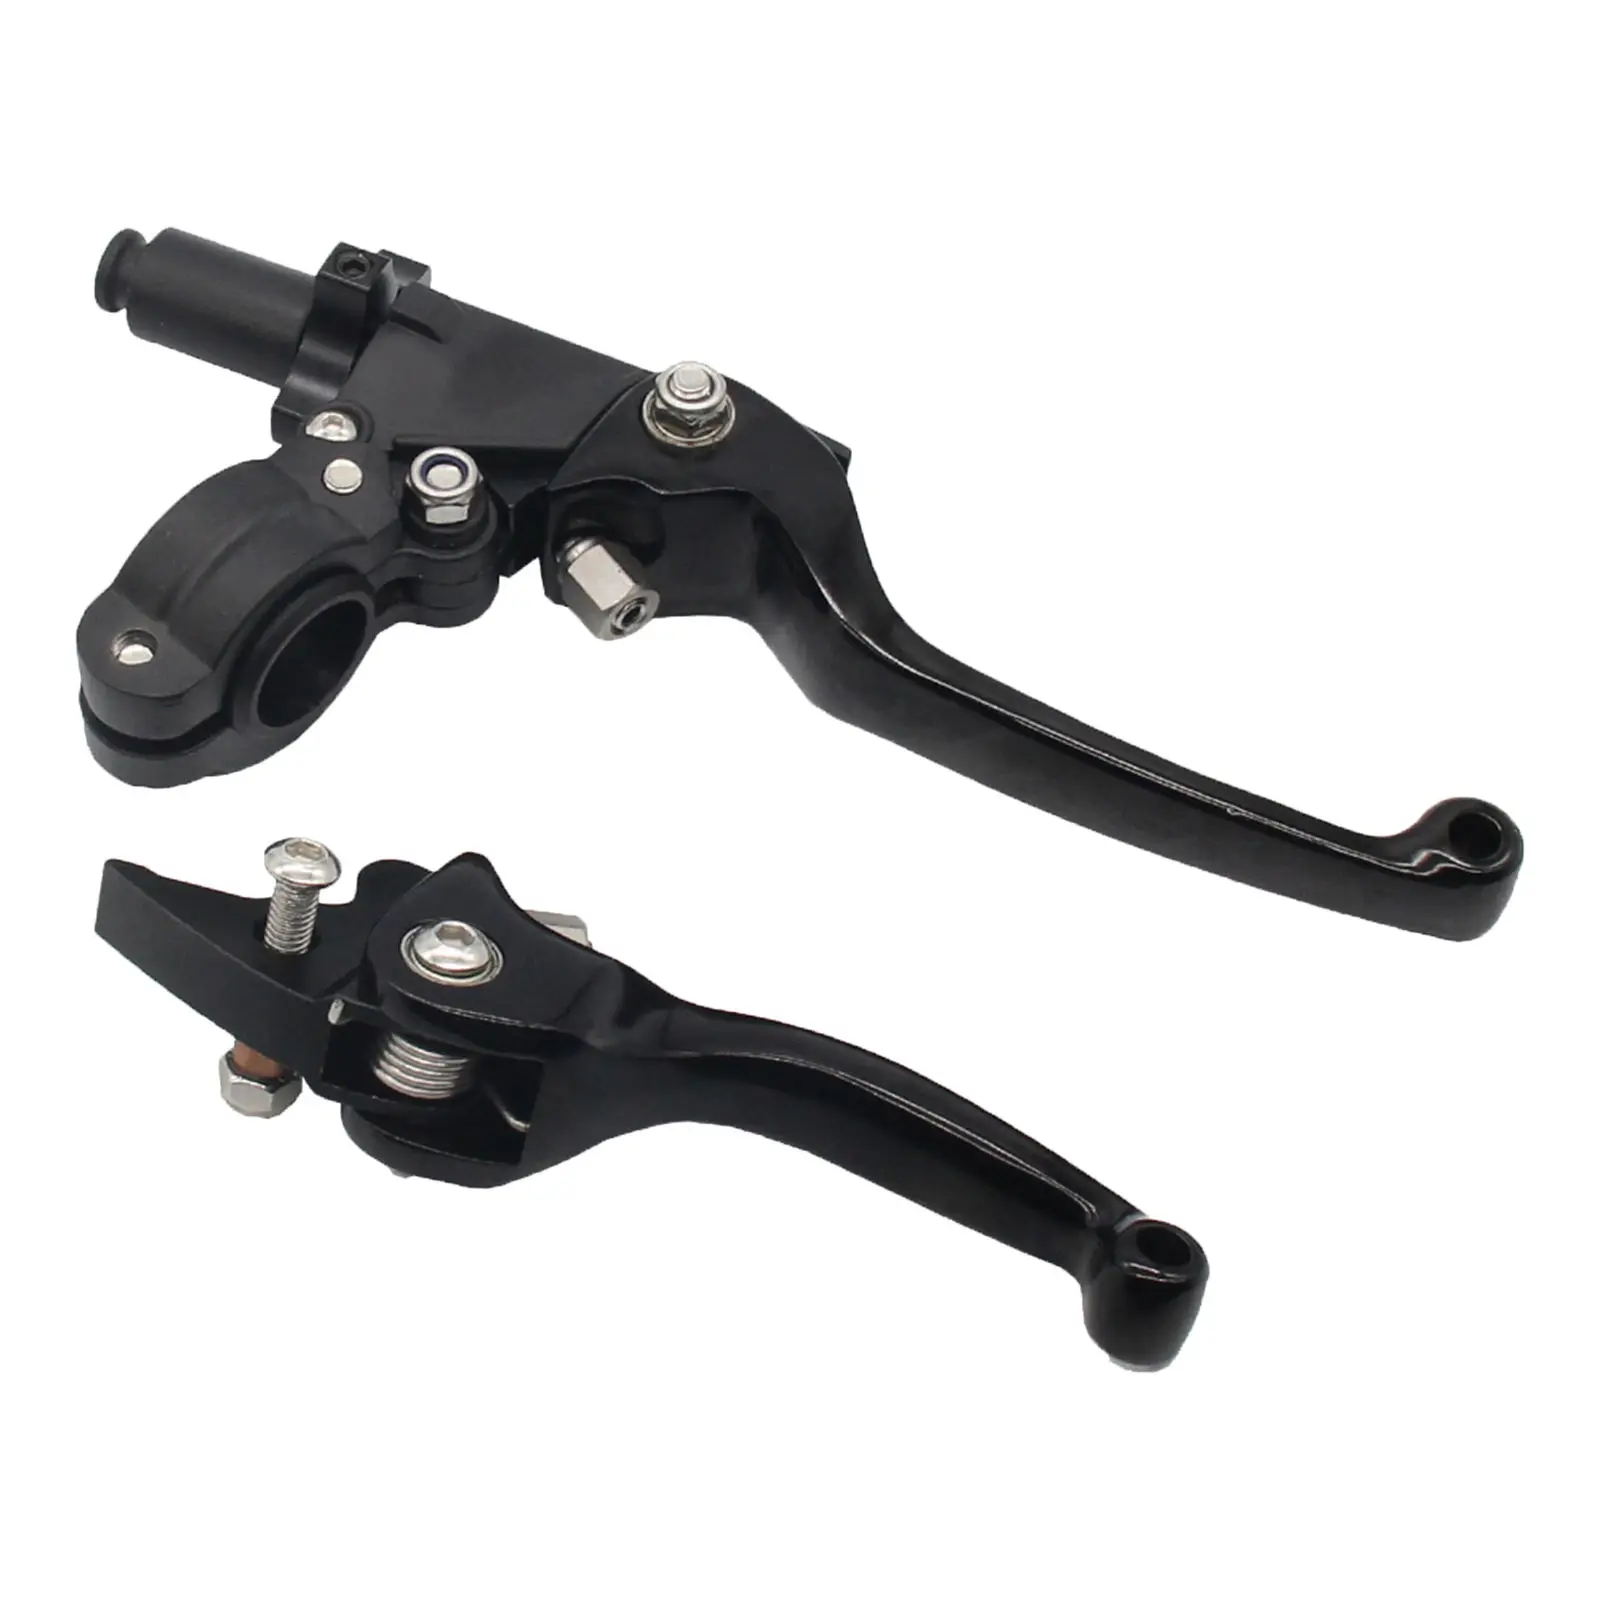 Clutch Brake Lever Left & Right Set Front Folding Universal Fits for 22mm 7/8 inch Handlebar Spare Parts 110Cc 125Cc 140Cc